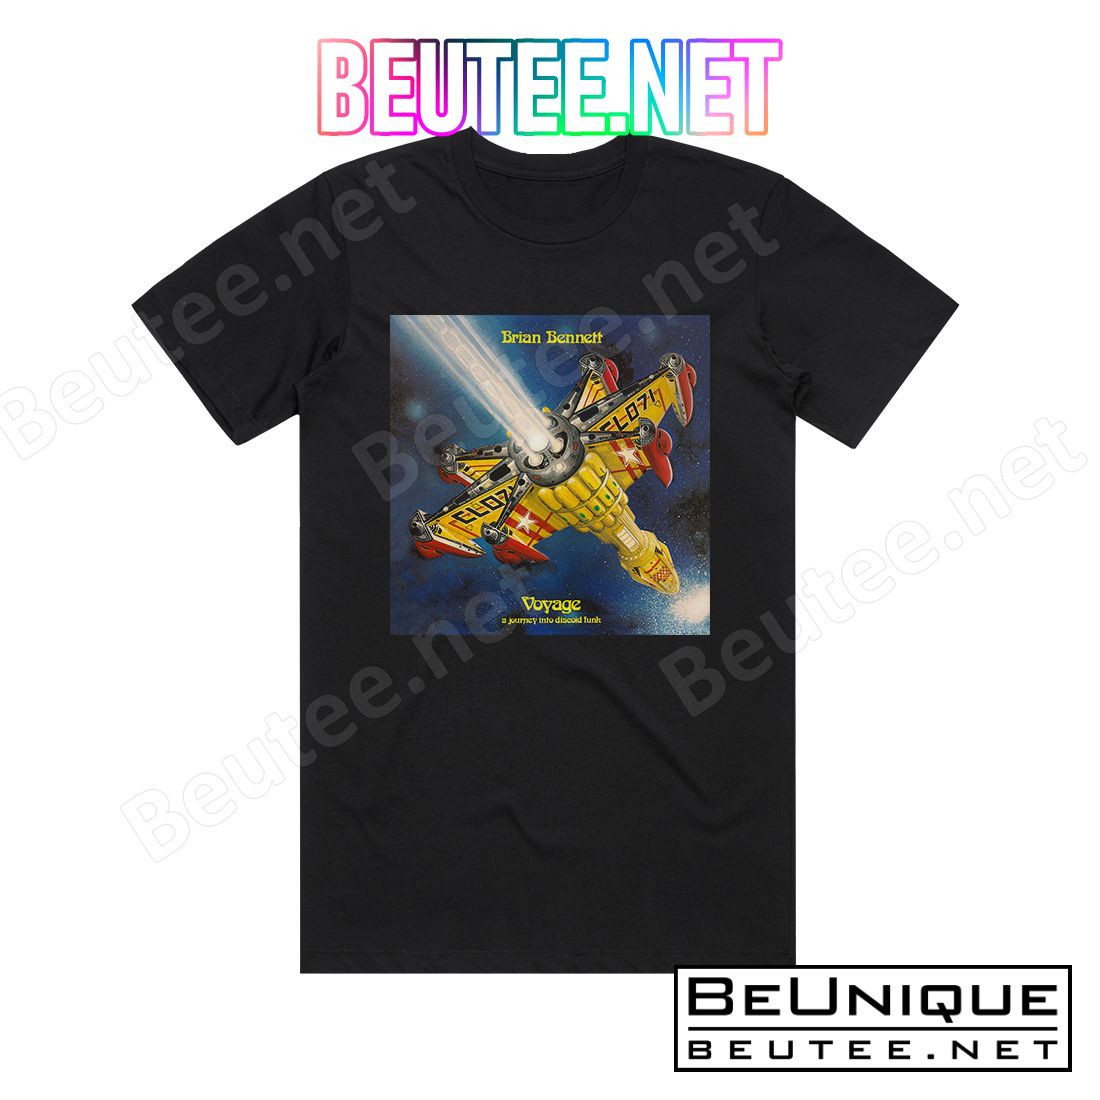 Brian Bennett Voyage A Journey Into Discoid Funk Album Cover T-Shirt